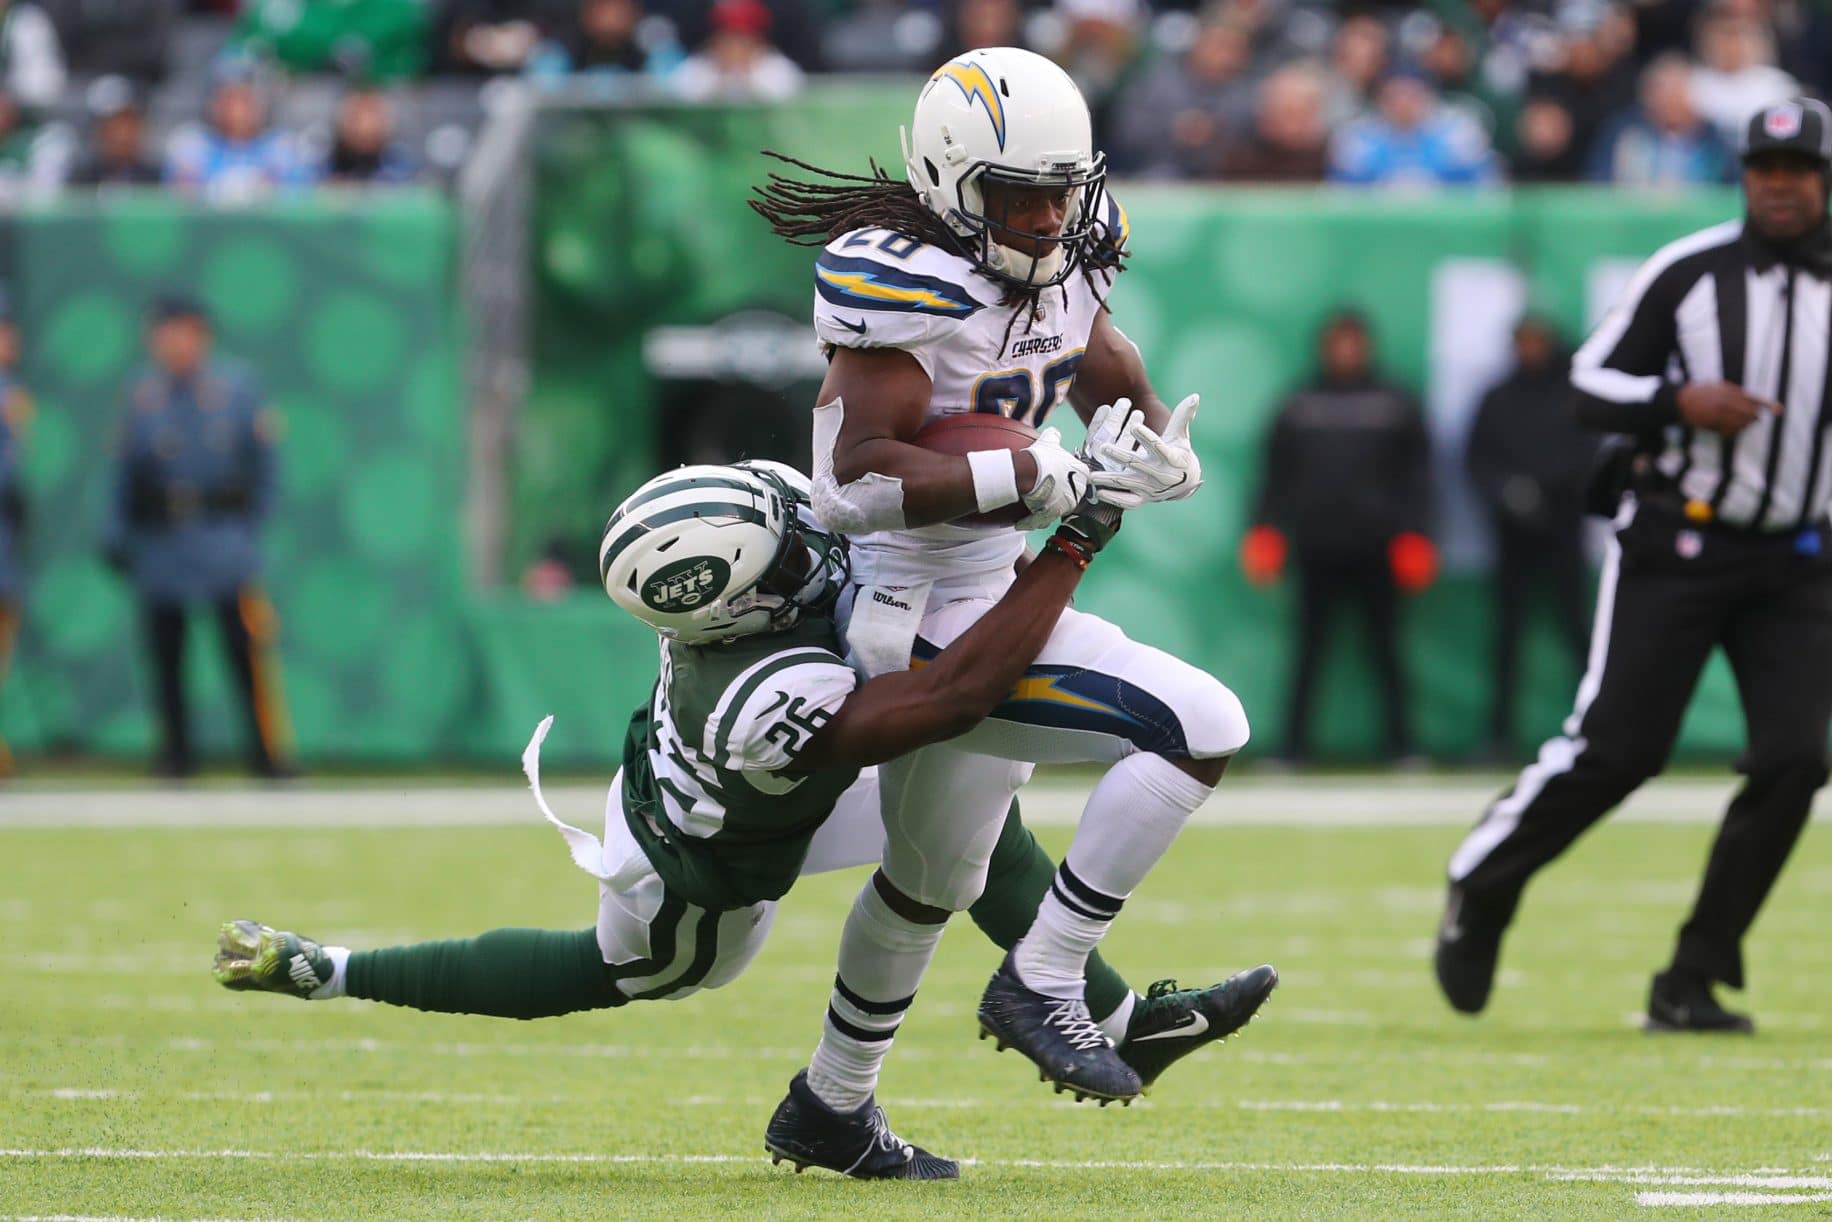 Melvin Gordon Los Angeles Chargers